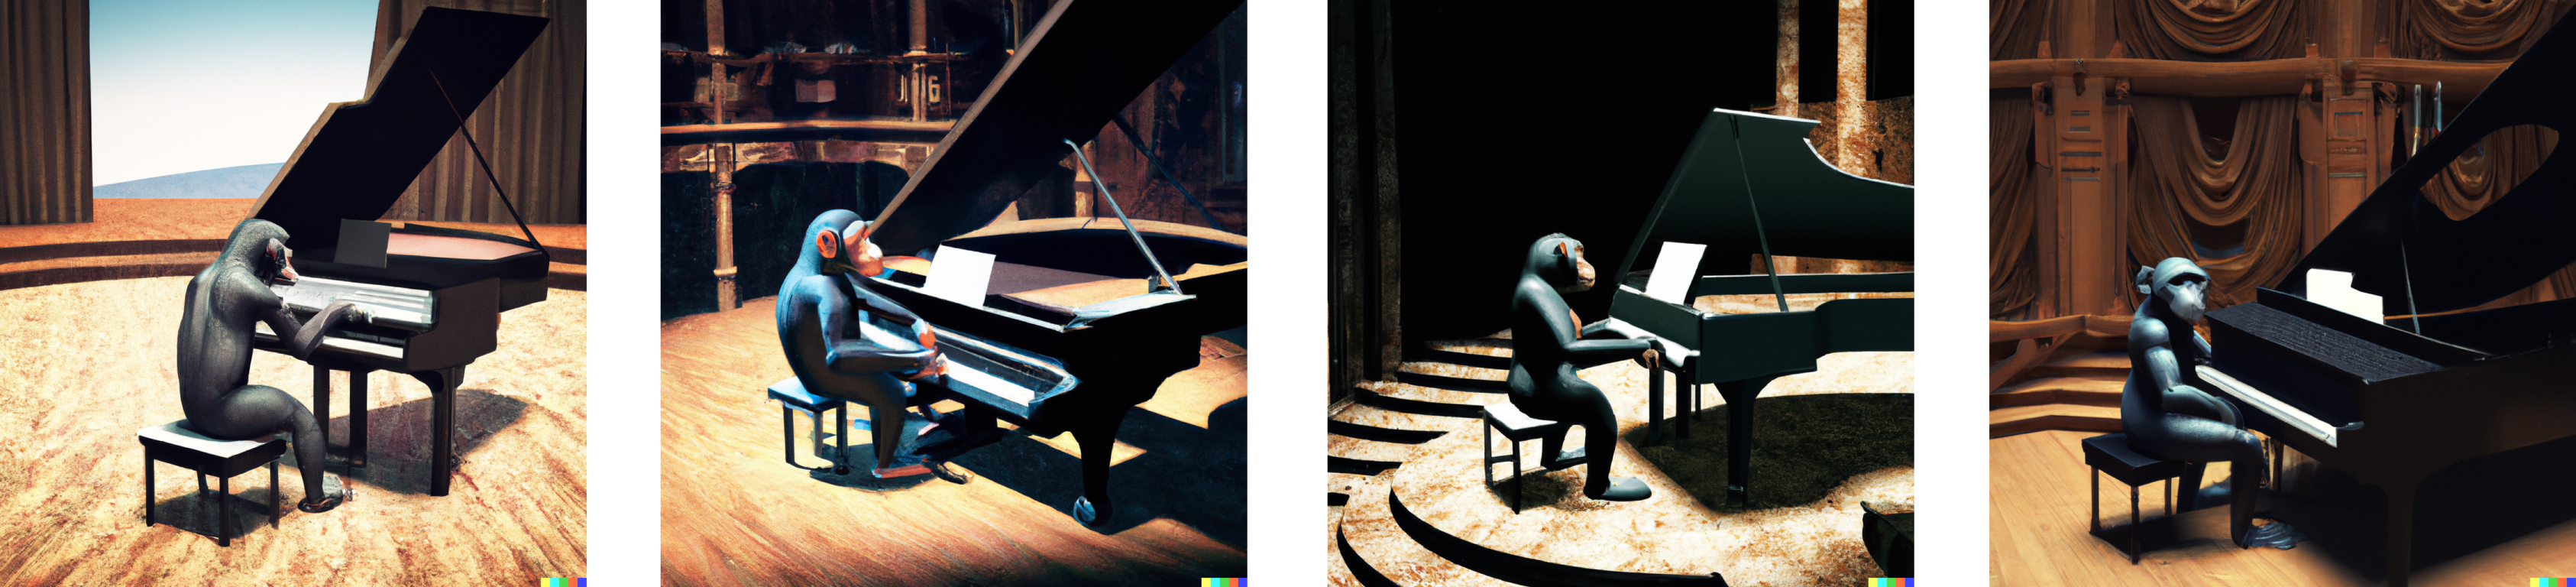 Images generated with Dall-E 2 on the caption <em>&lsquo;A chimpanzee playing piano on the stage of a modern opera house, photorealistic&rsquo;</em>.